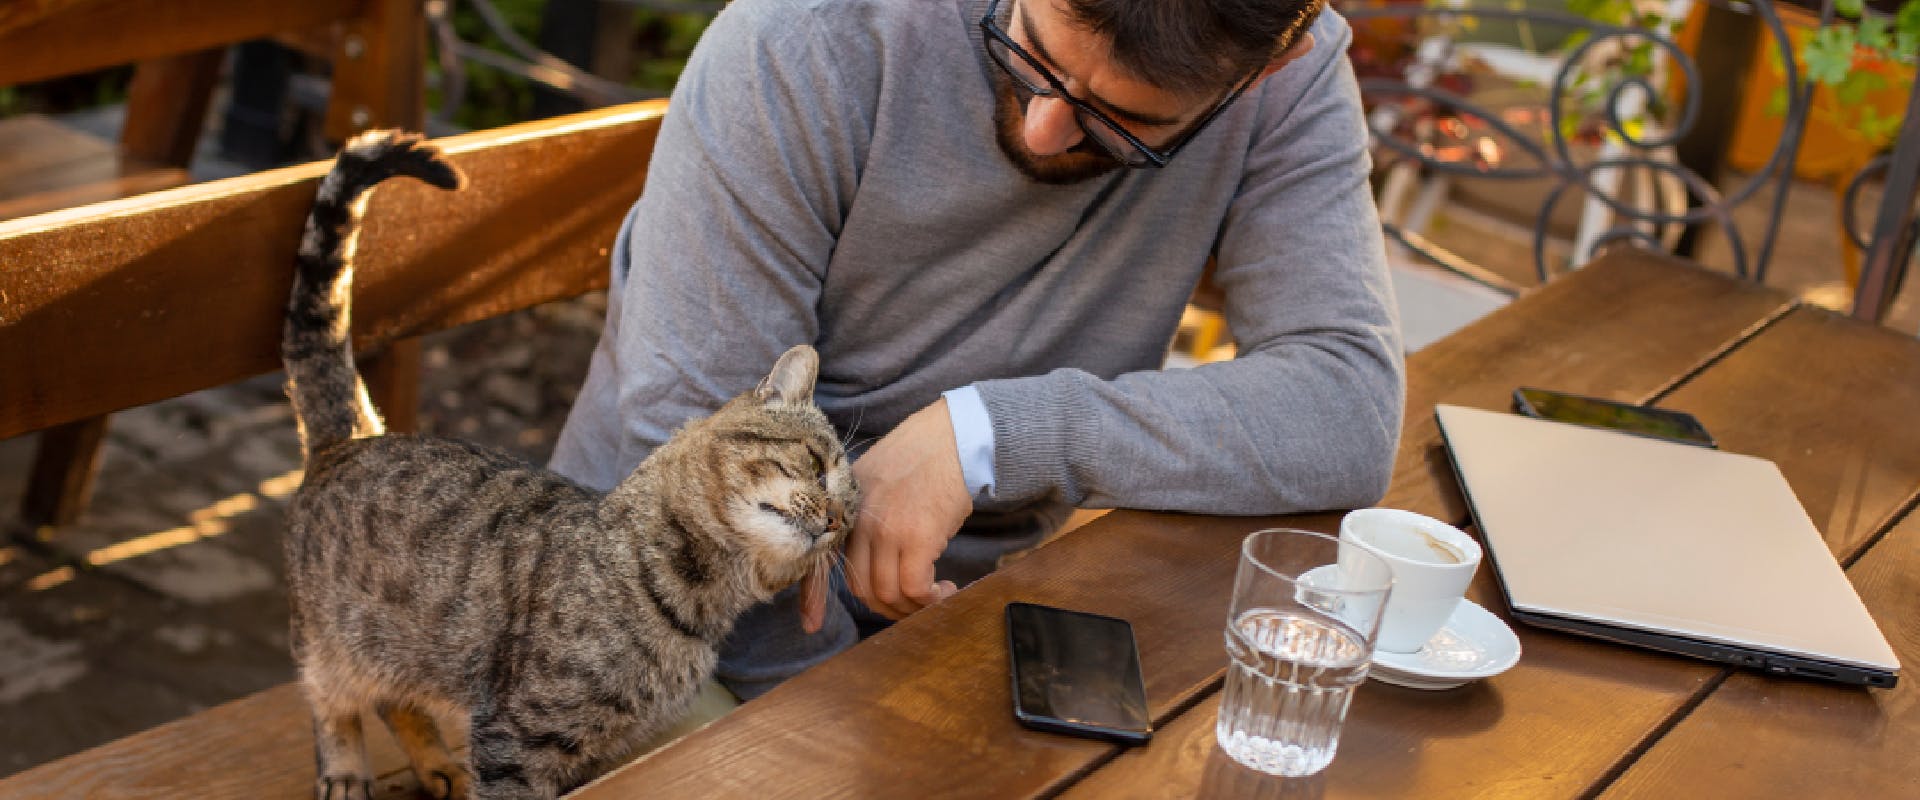 A cat rubs its head against a man's hand in a cafe.